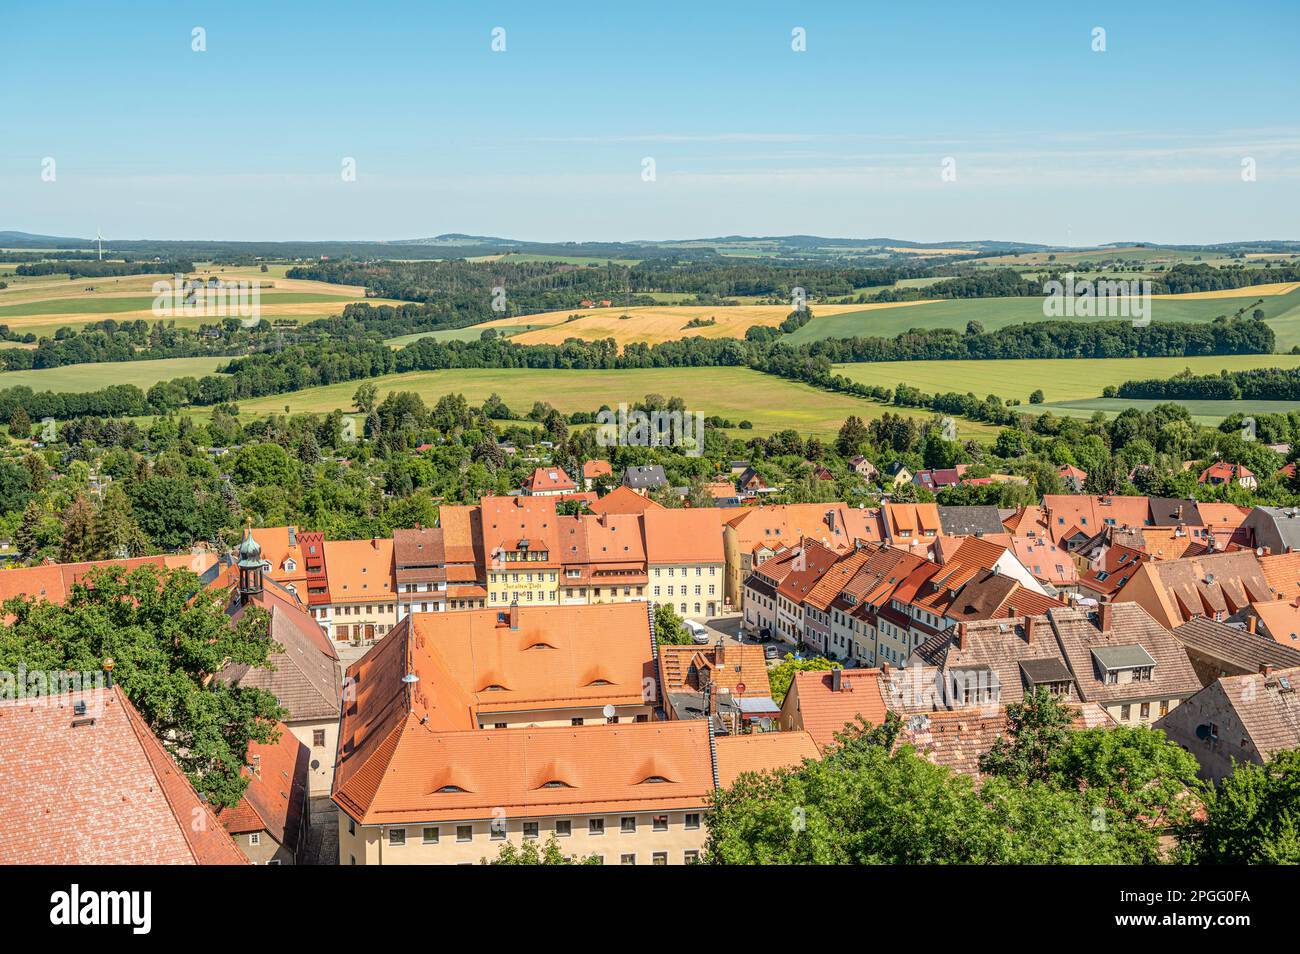 View of the old town of Stolpen seen from the castle, Saxony, Germany Stock Photo